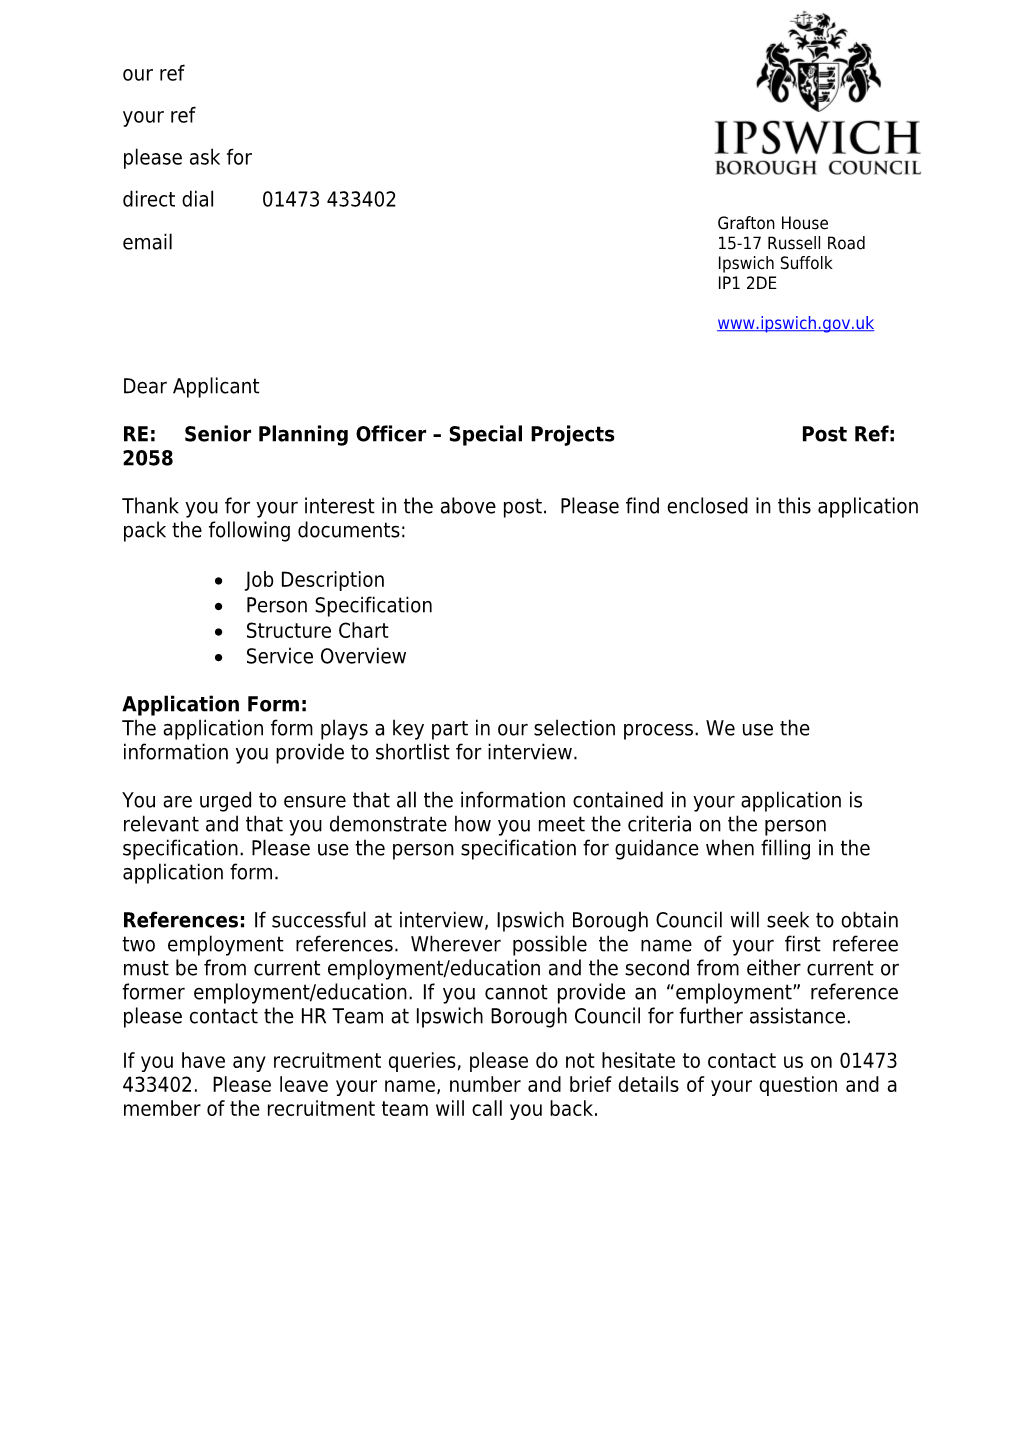 RE:Senior Planning Officer Special Projects Post Ref: 2058